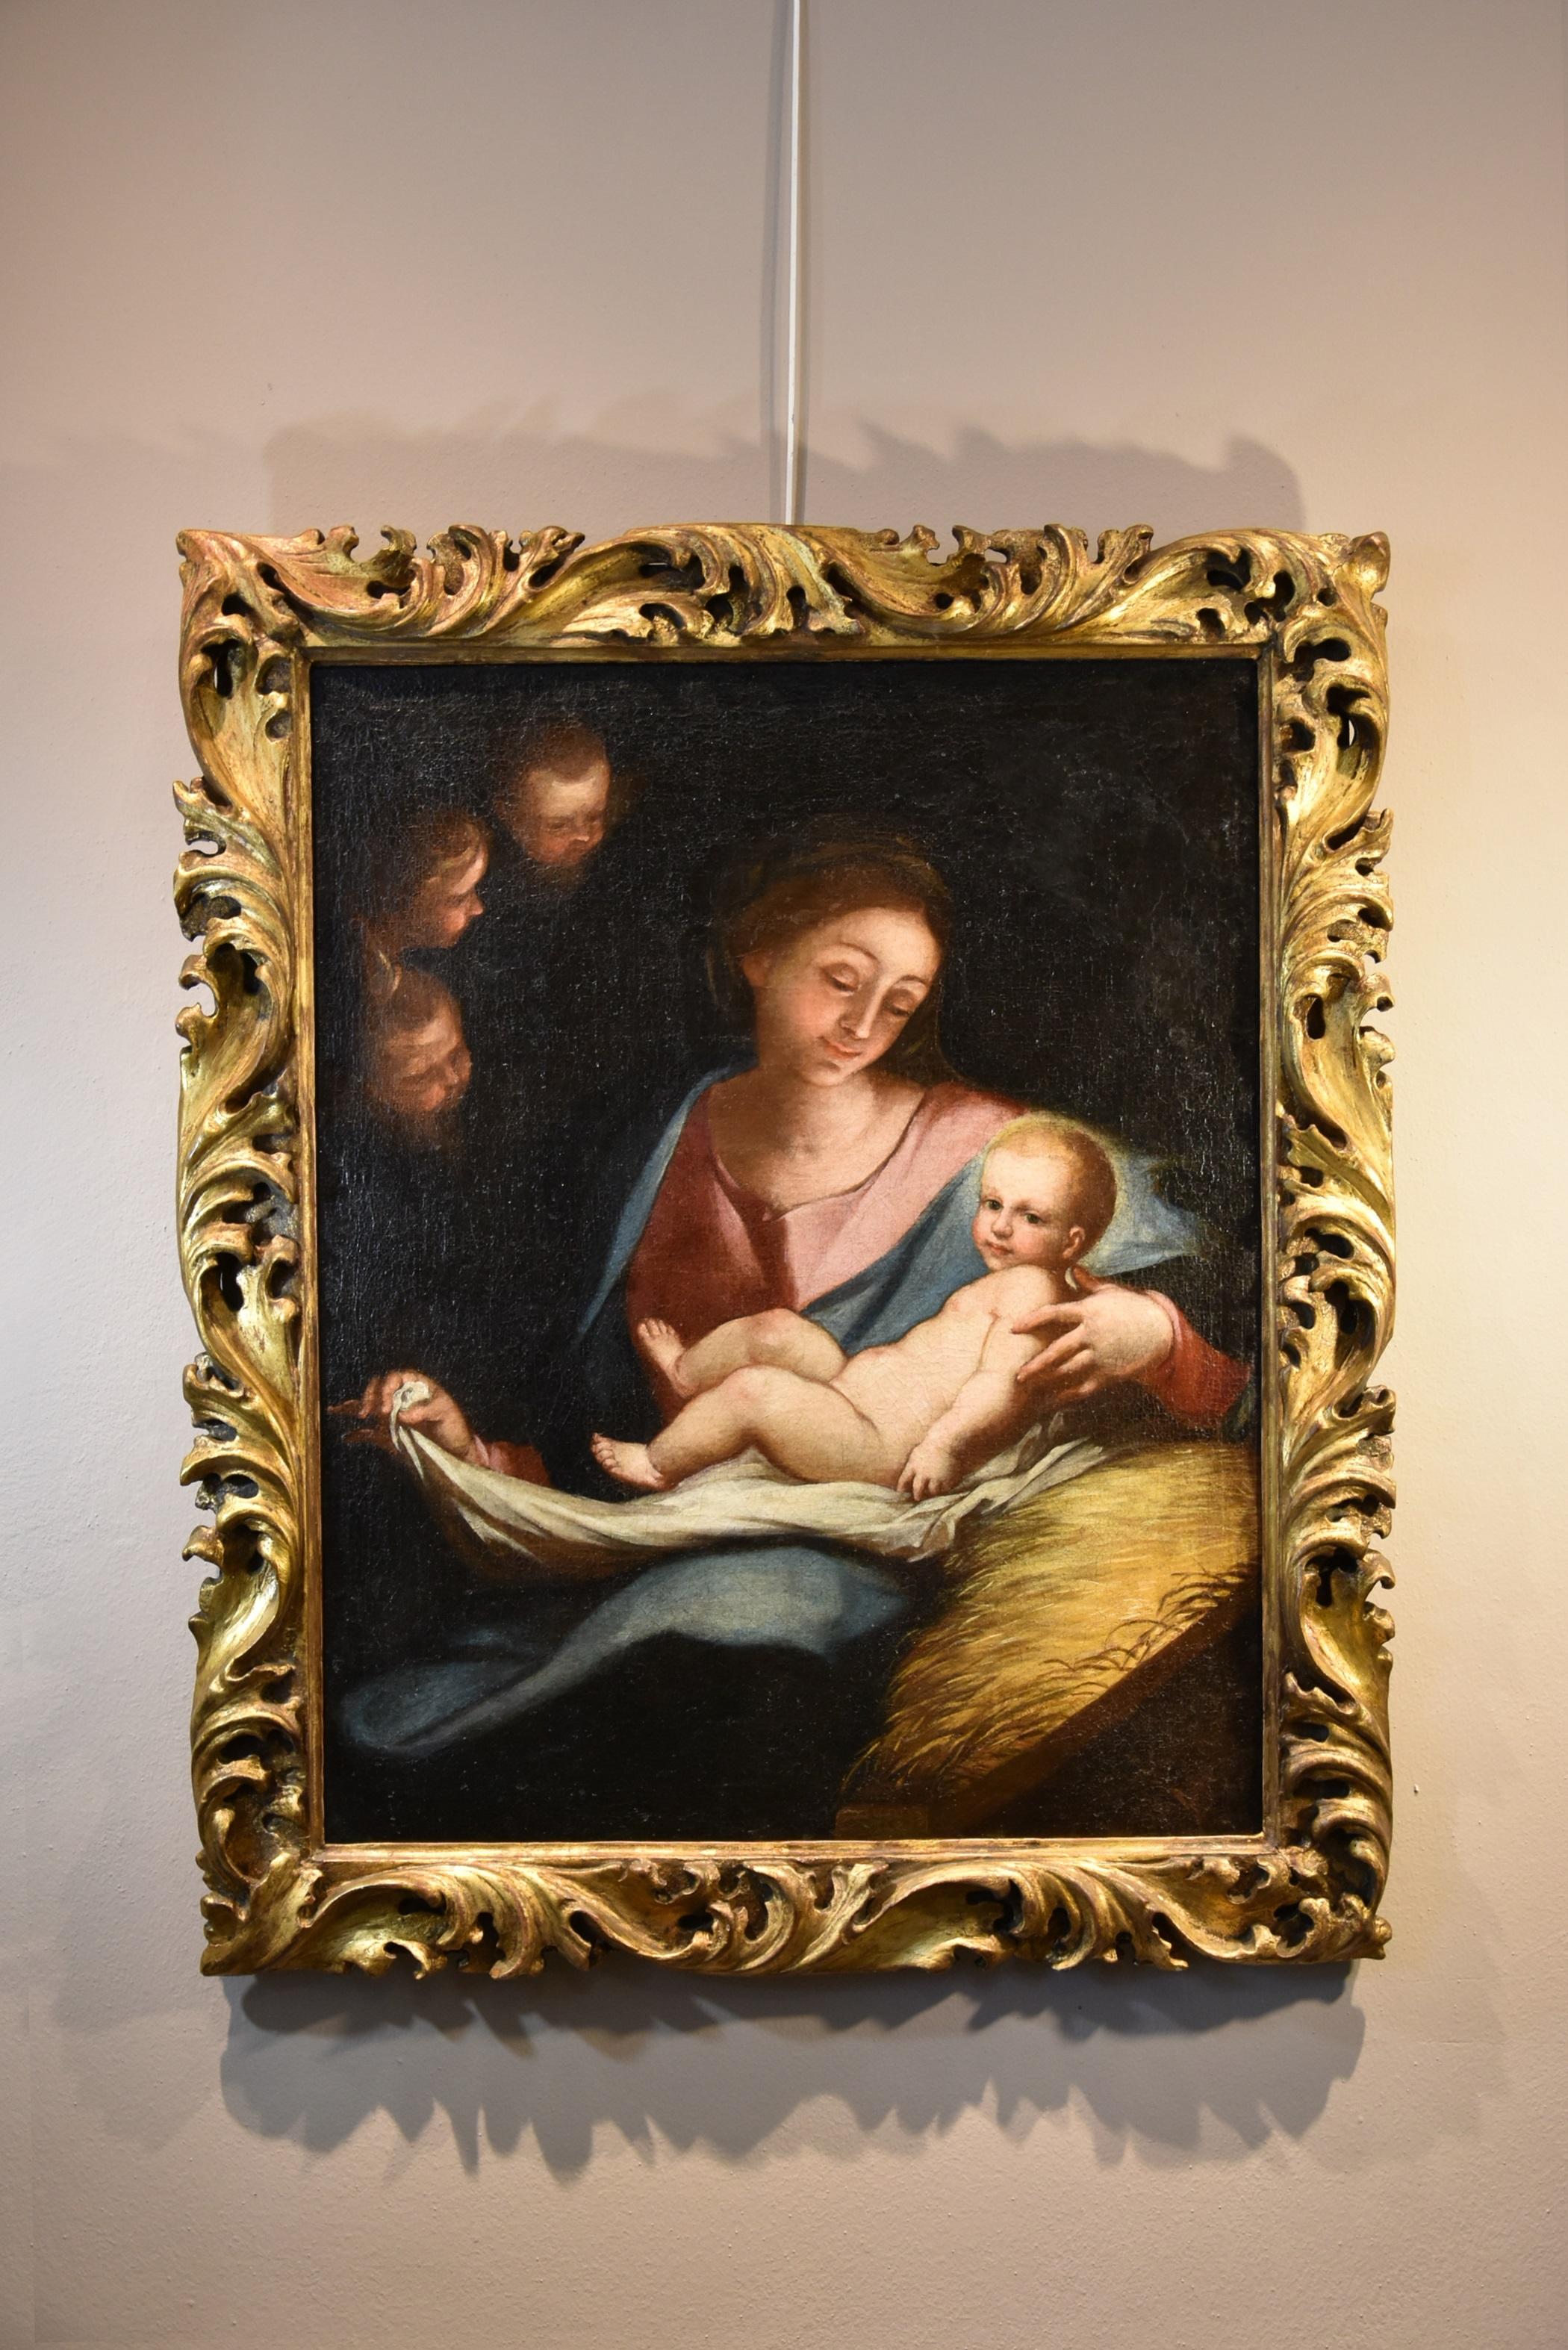  Madonna Maria Piola Paint Oil on canvas 17/18th Century Old master Religious - Old Masters Painting by Anton Maria Piola (genoa, 1654 - 1715)